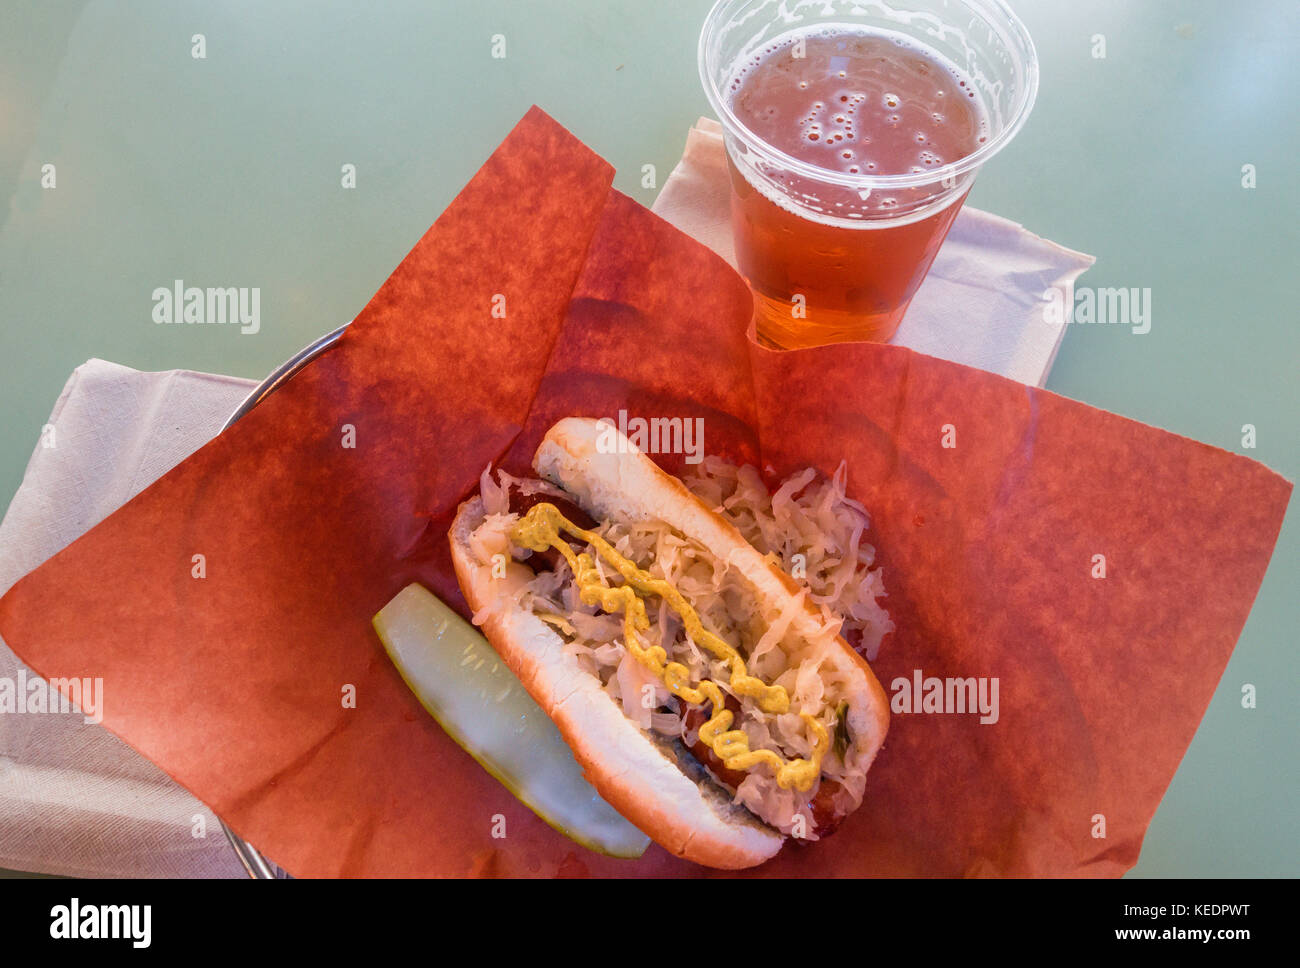 Hotdog with sauerkraut and mustard and a beer Stock Photo